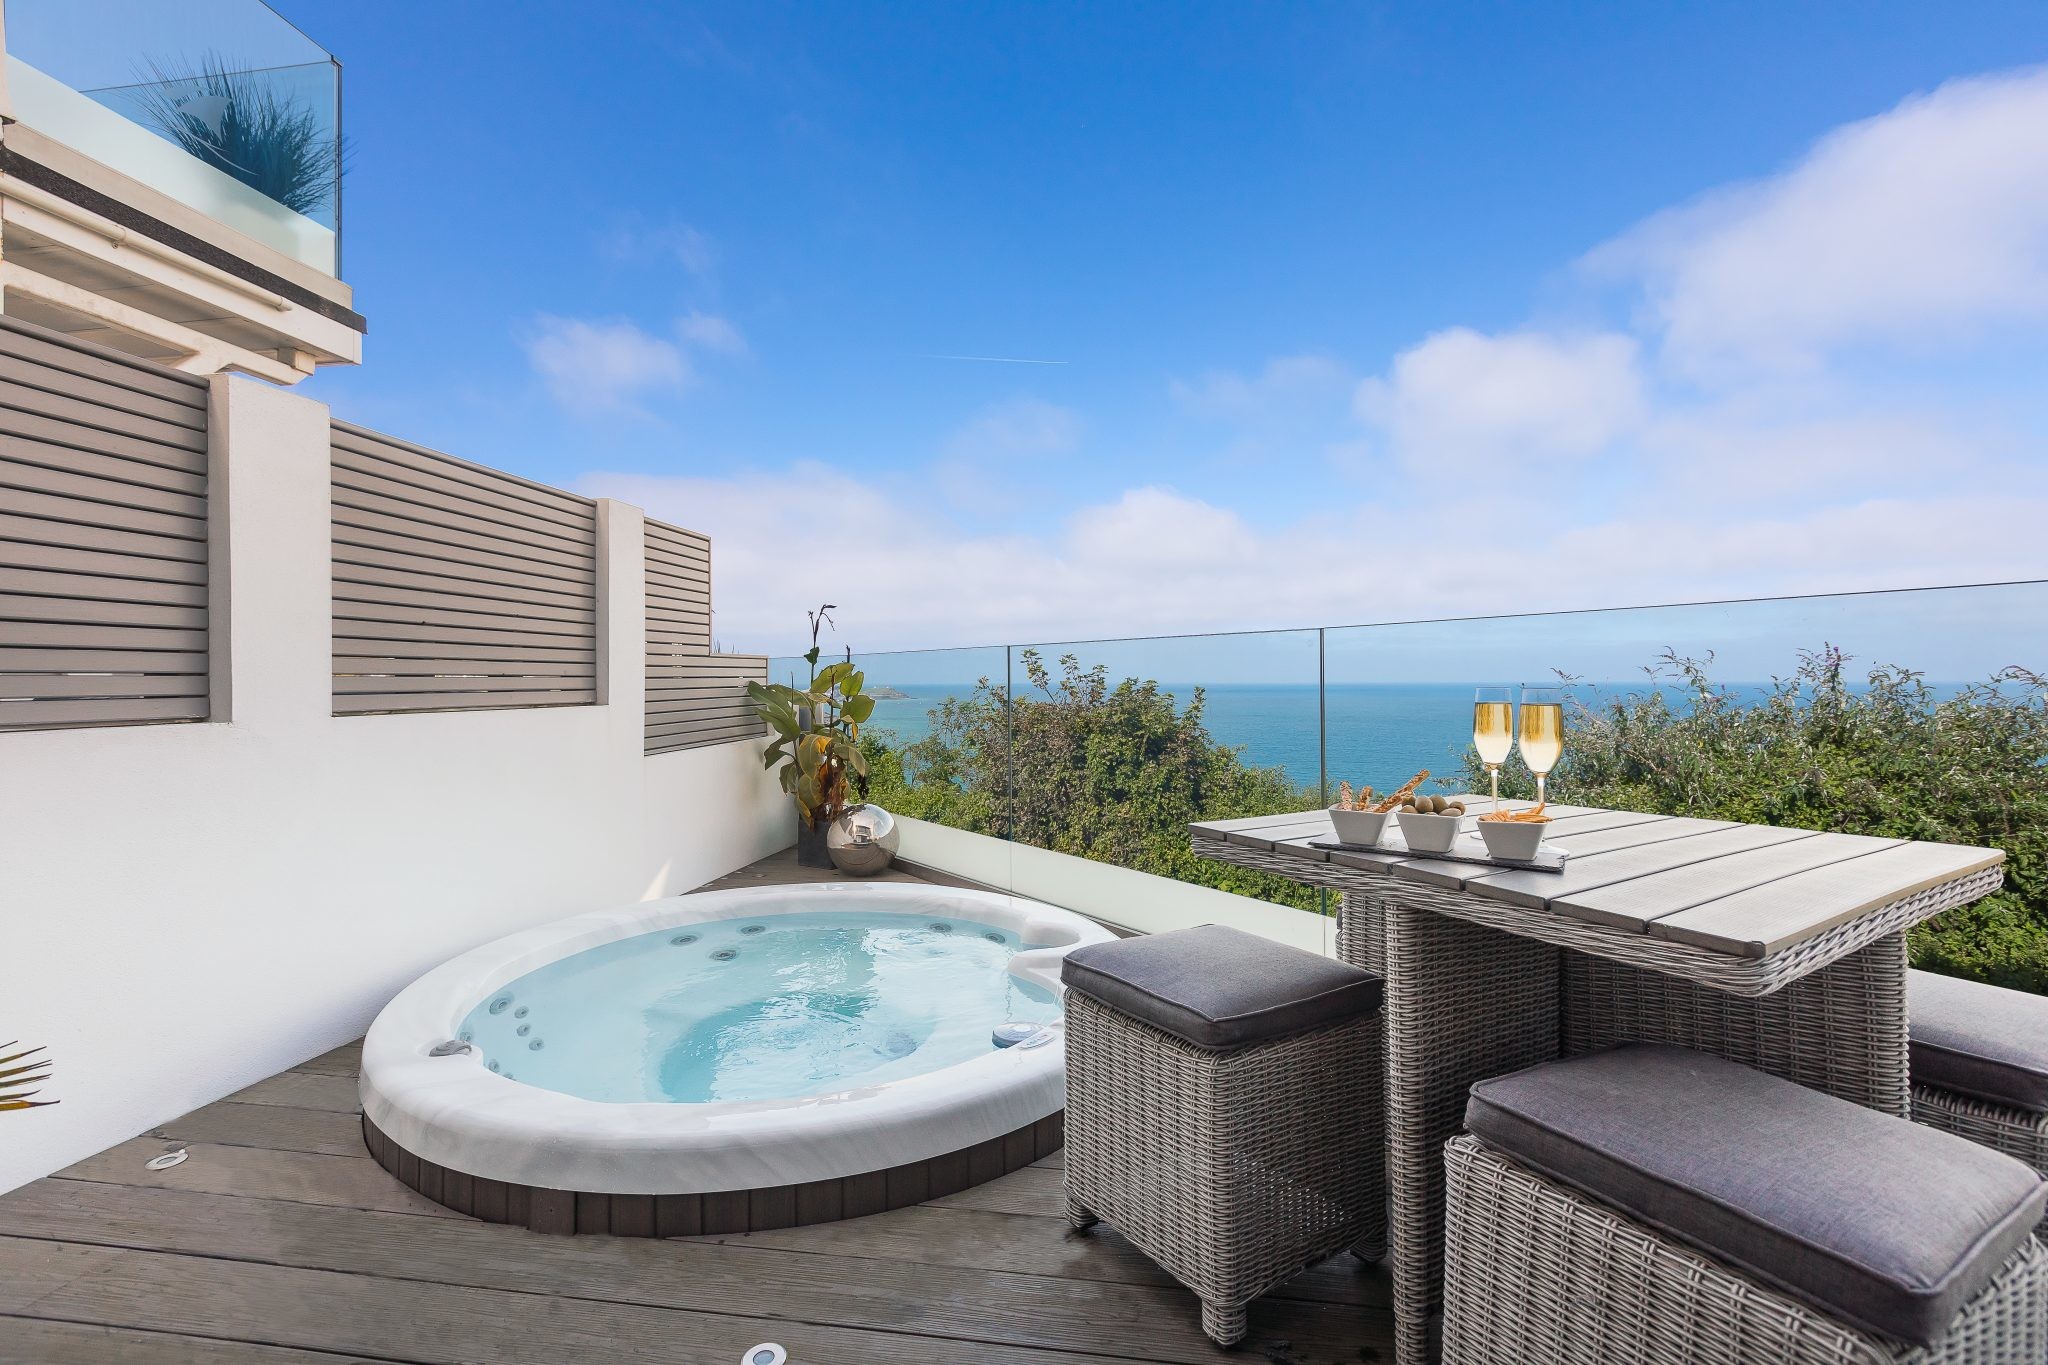 Hot tub on decking with balcony looking towards the sea